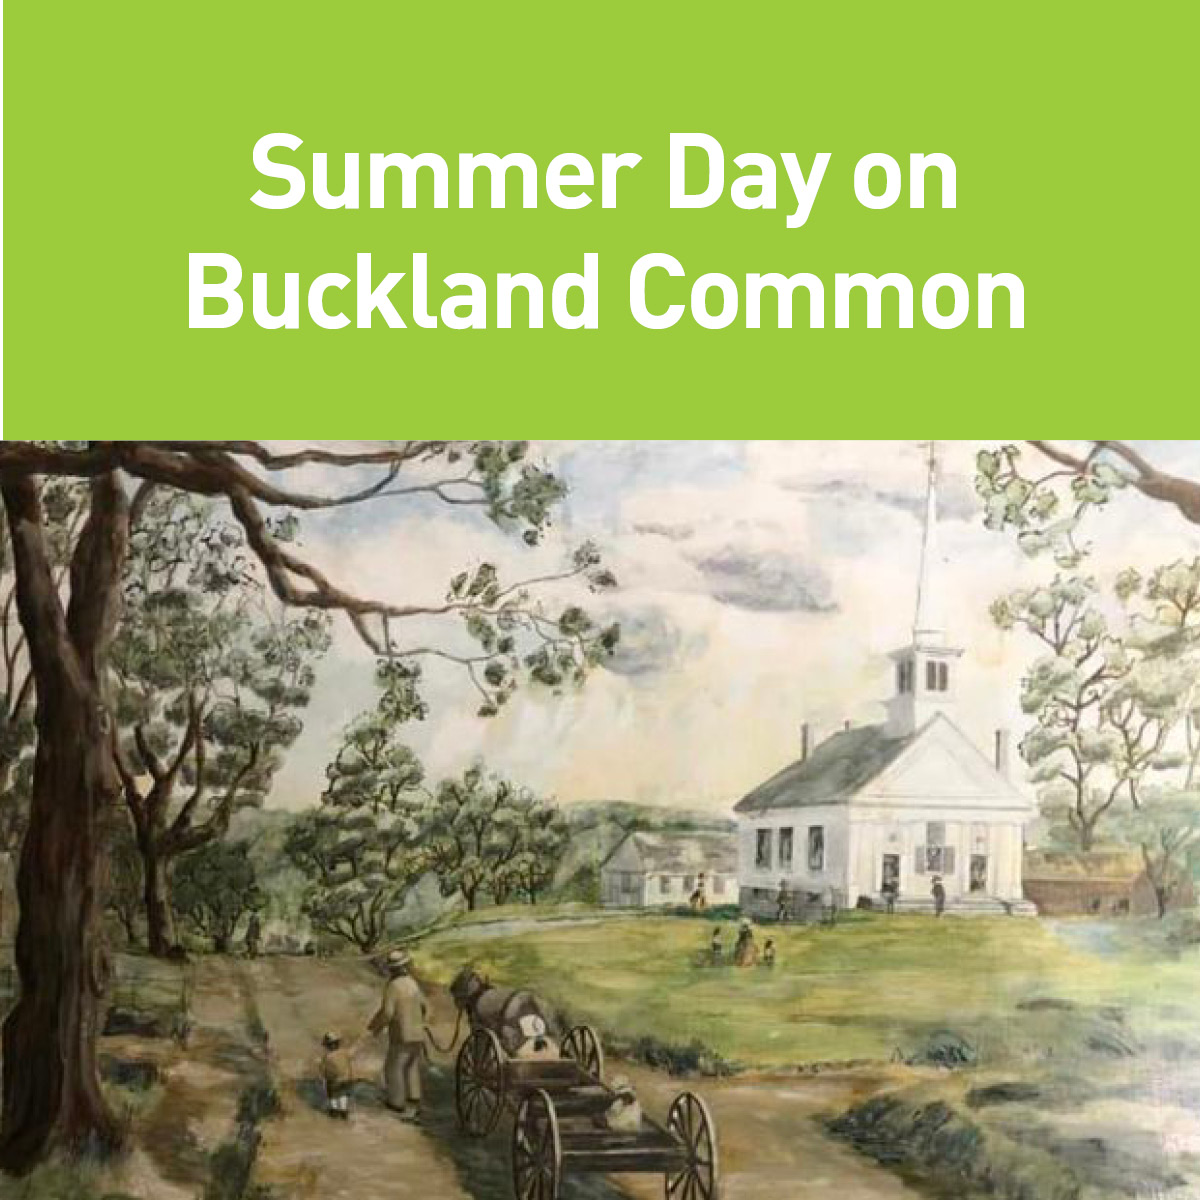 Summer Day on Buckland Common logo with a historic painting of the common